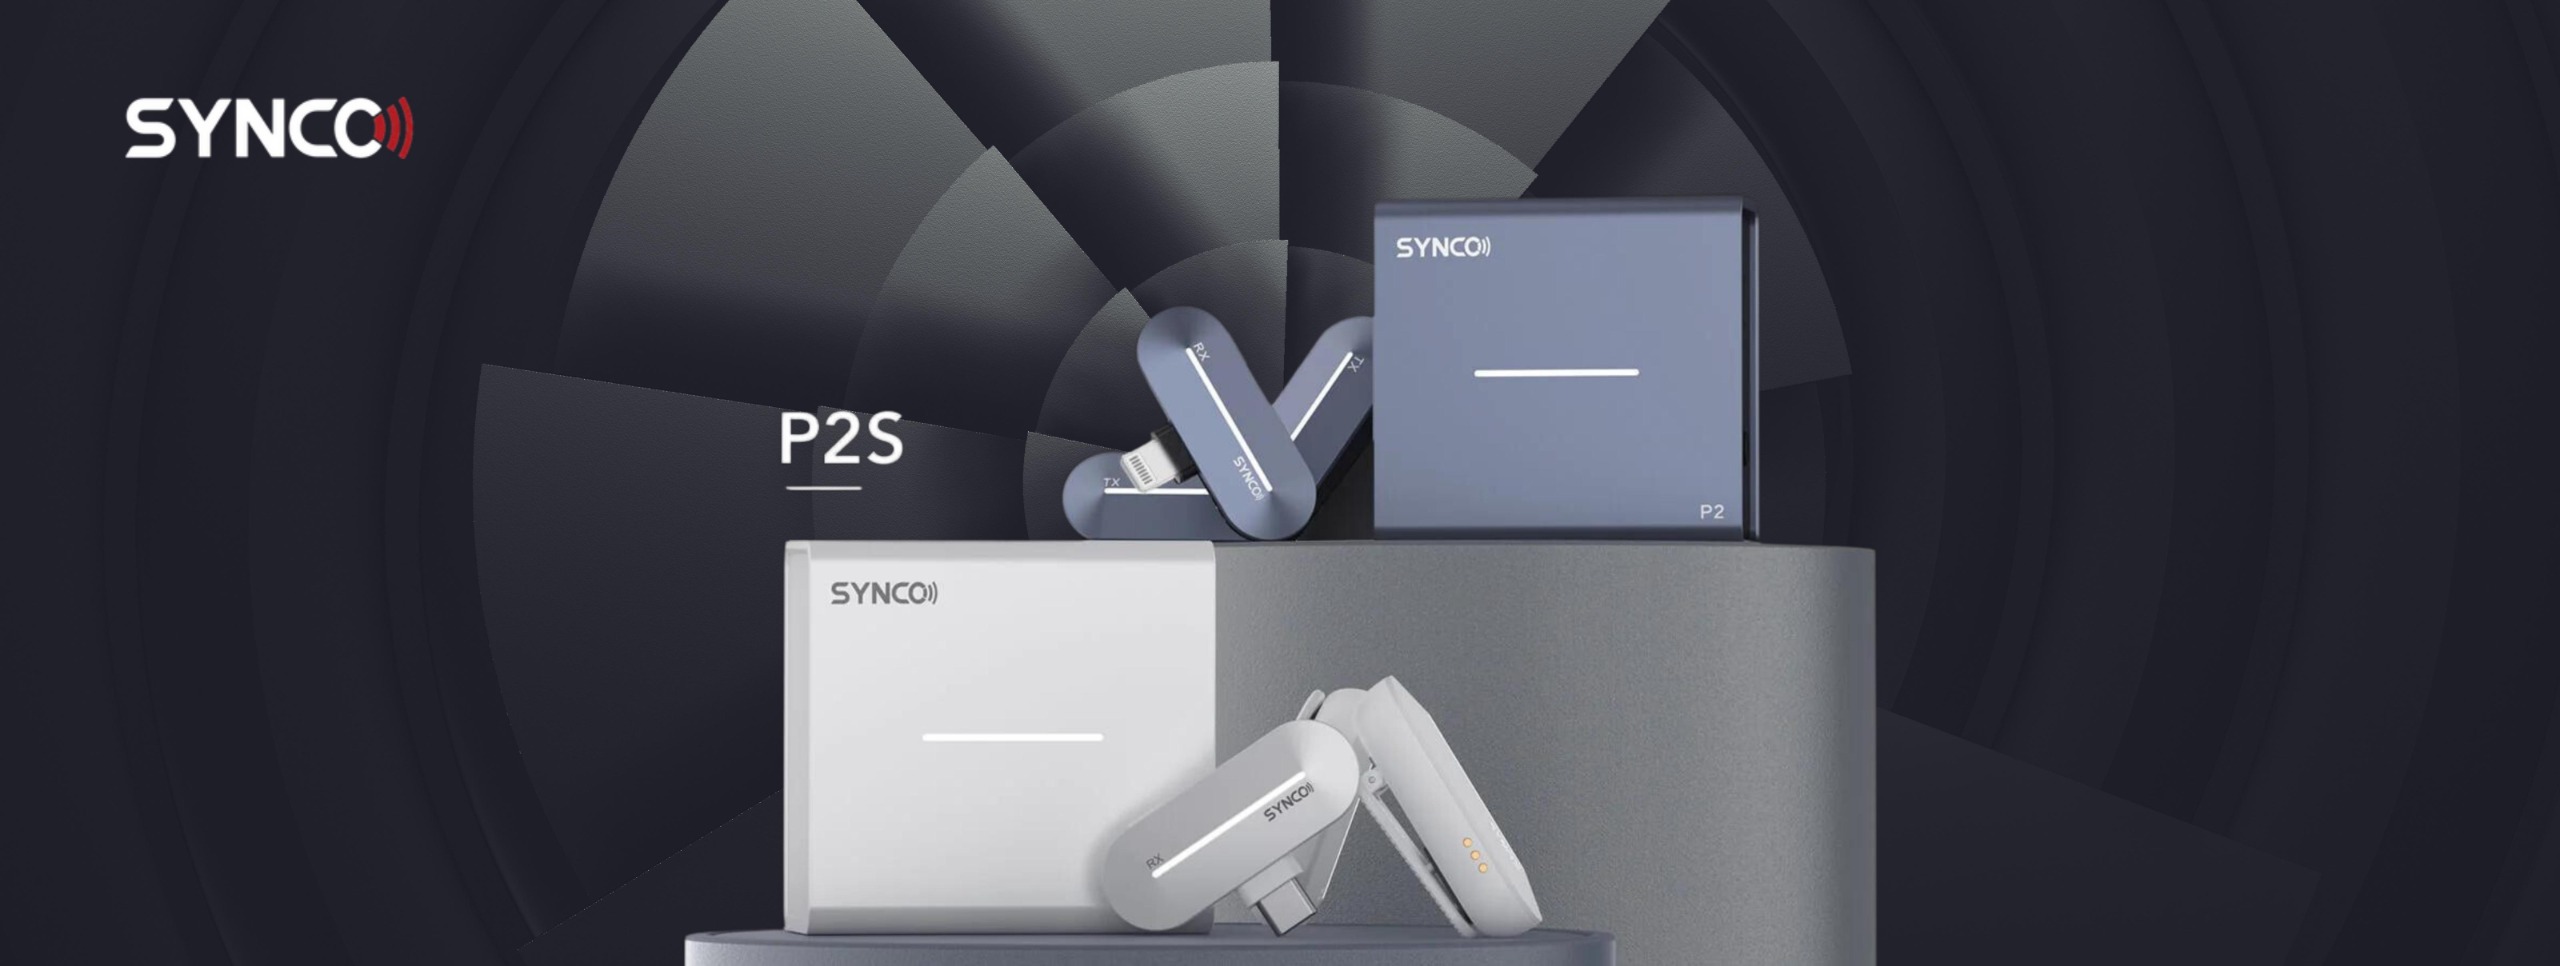 SYNCO Banner